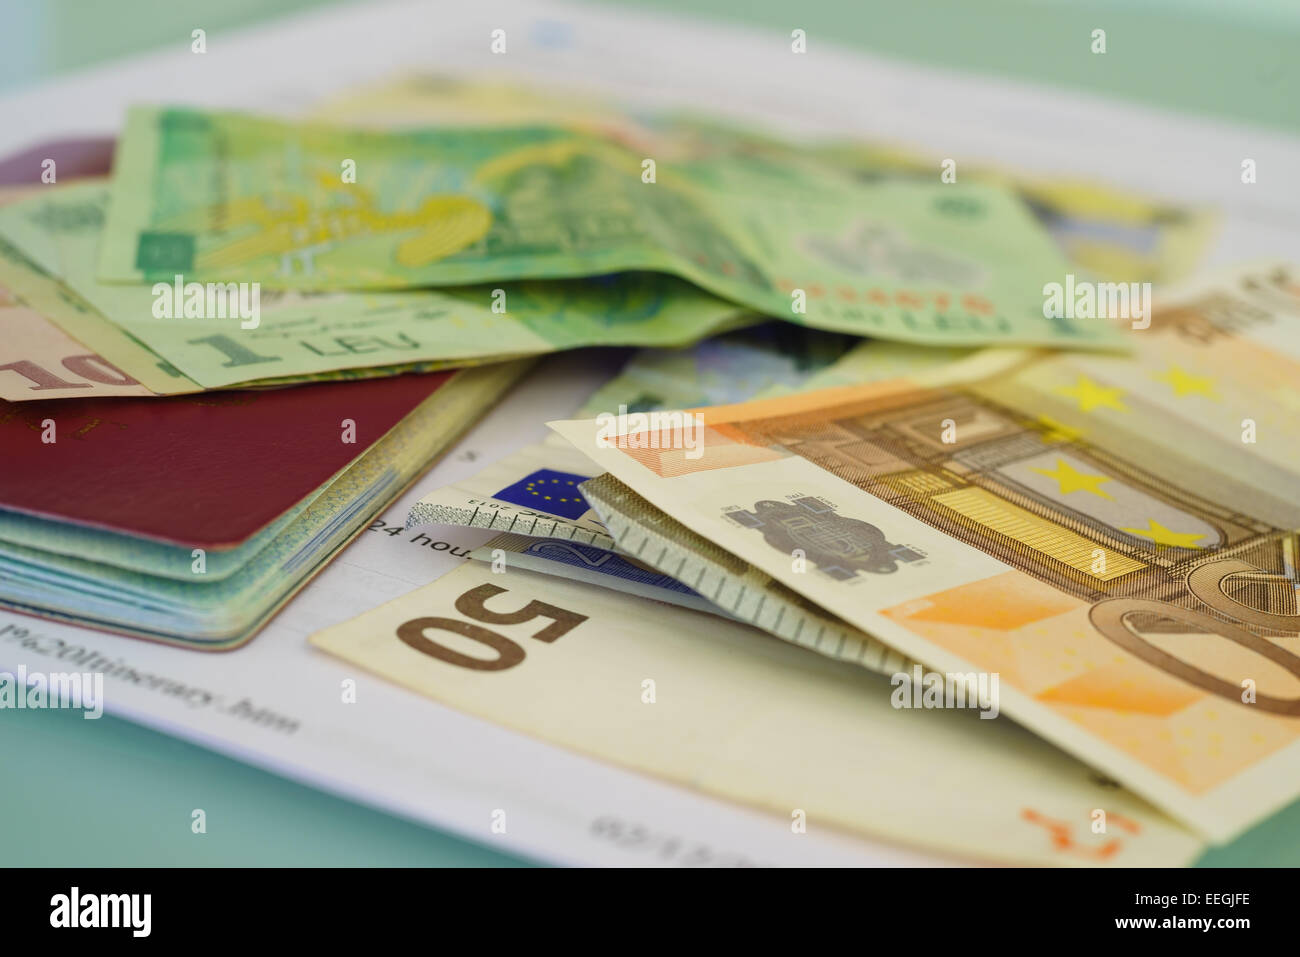 Travel documents, passport, foreign money (Euro and Romanian Leu) and flight itinerary for travelling. Stock Photo